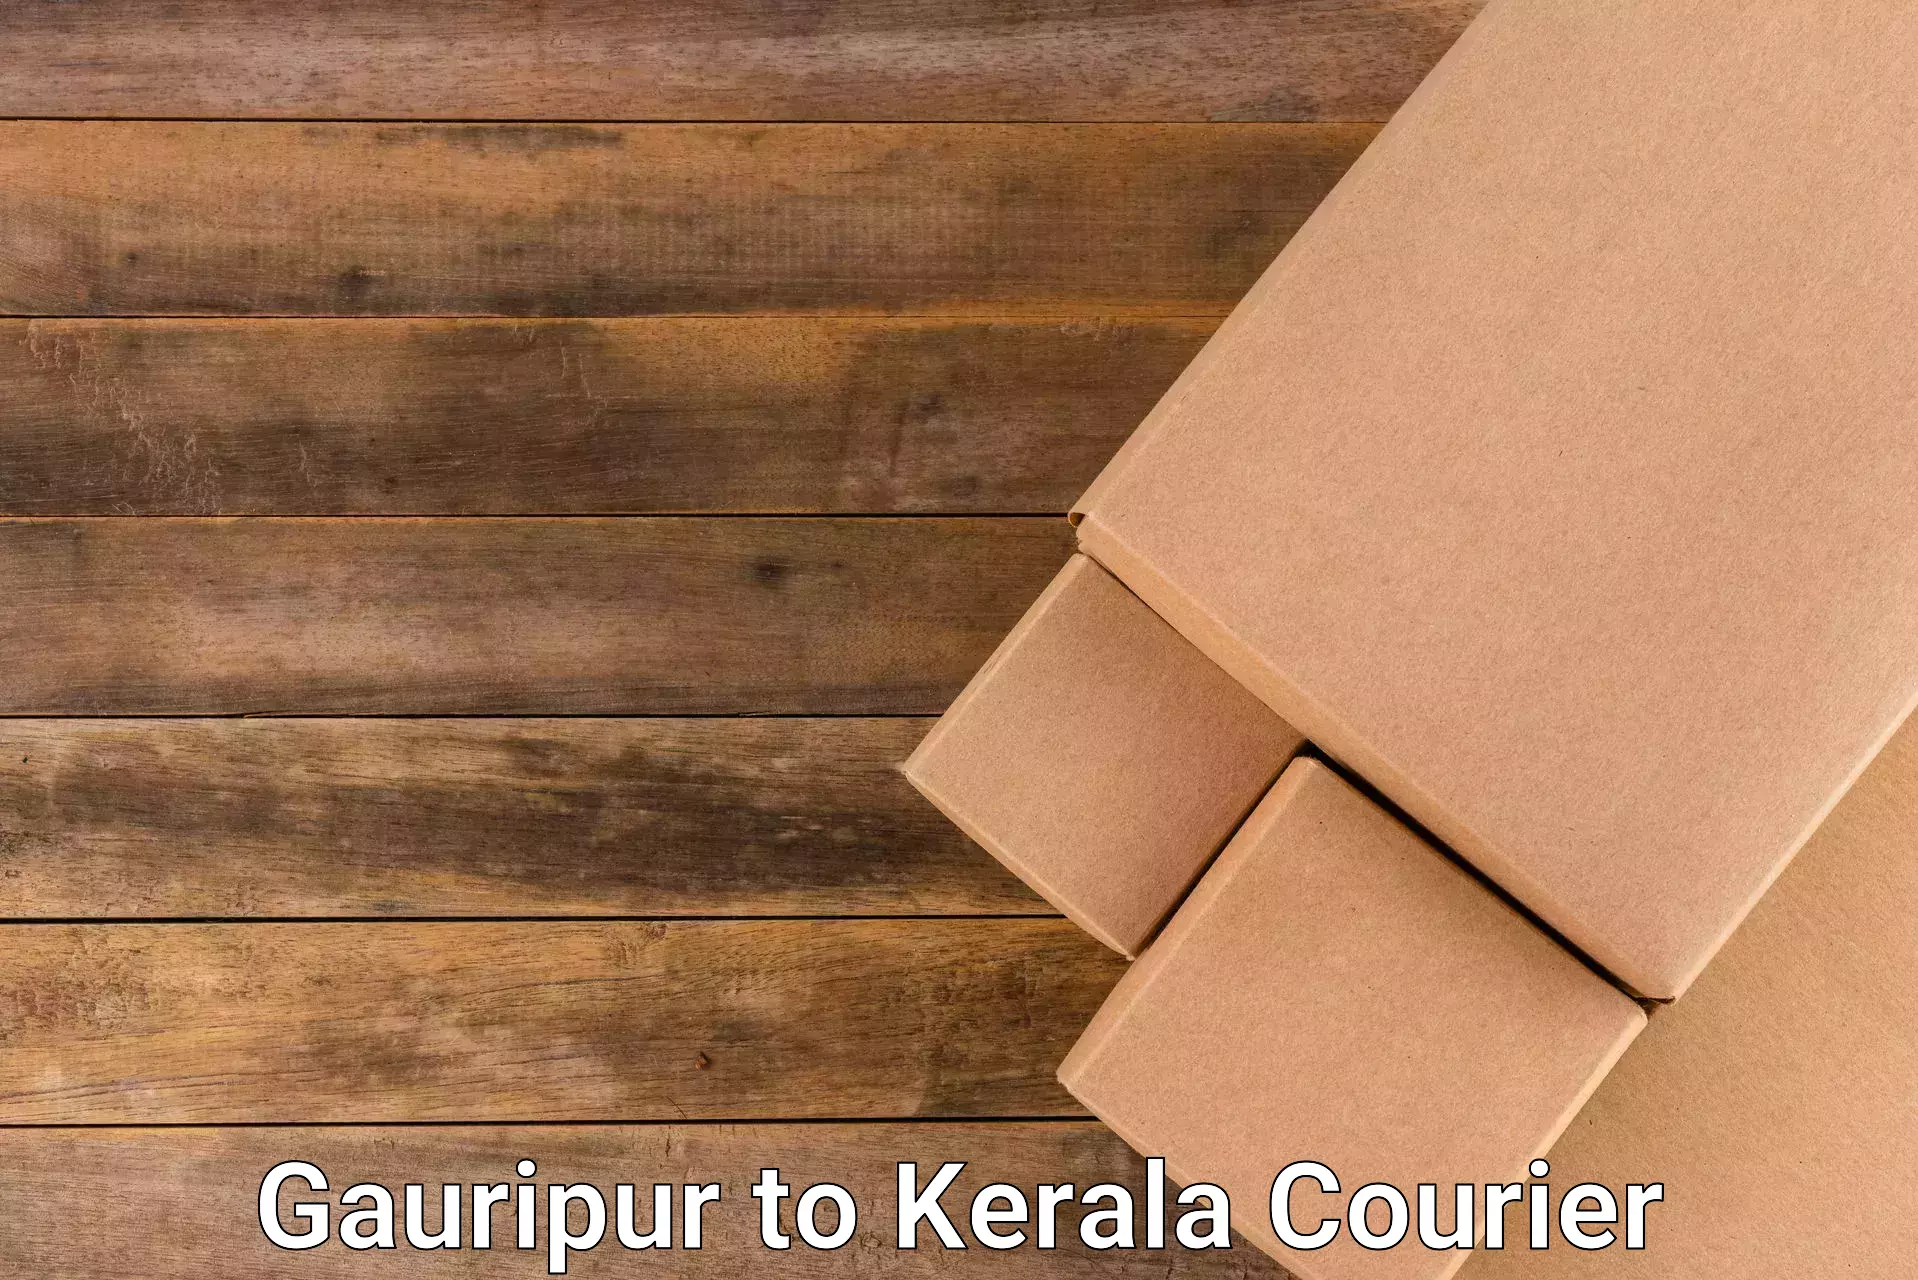 Efficient freight service Gauripur to Kerala